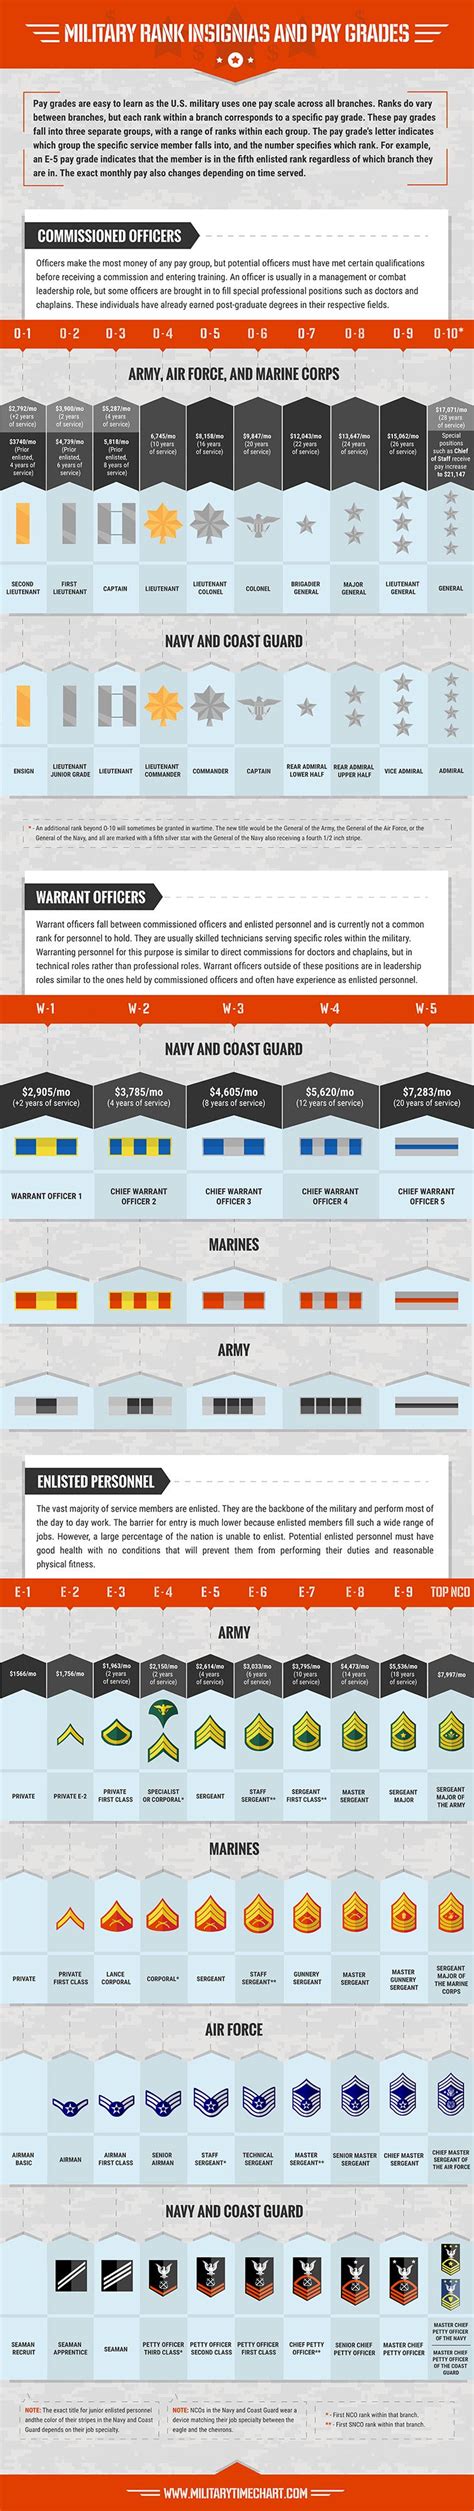 Military Pay Charts 2016